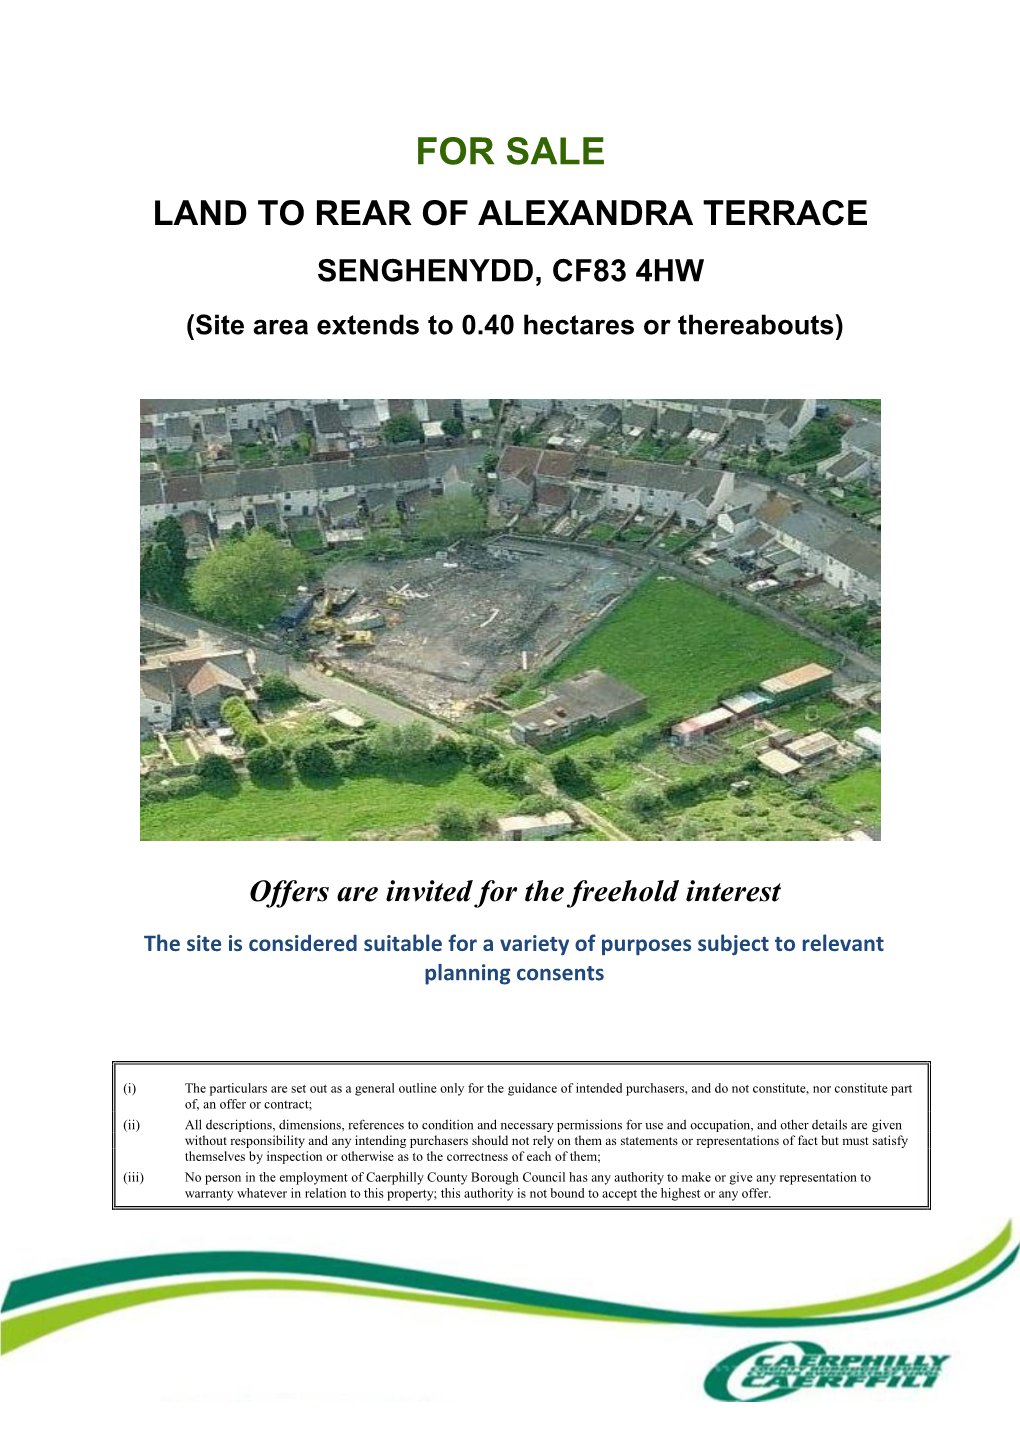 FOR SALE LAND to REAR of ALEXANDRA TERRACE SENGHENYDD, CF83 4HW (Site Area Extends to 0.40 Hectares Or Thereabouts)